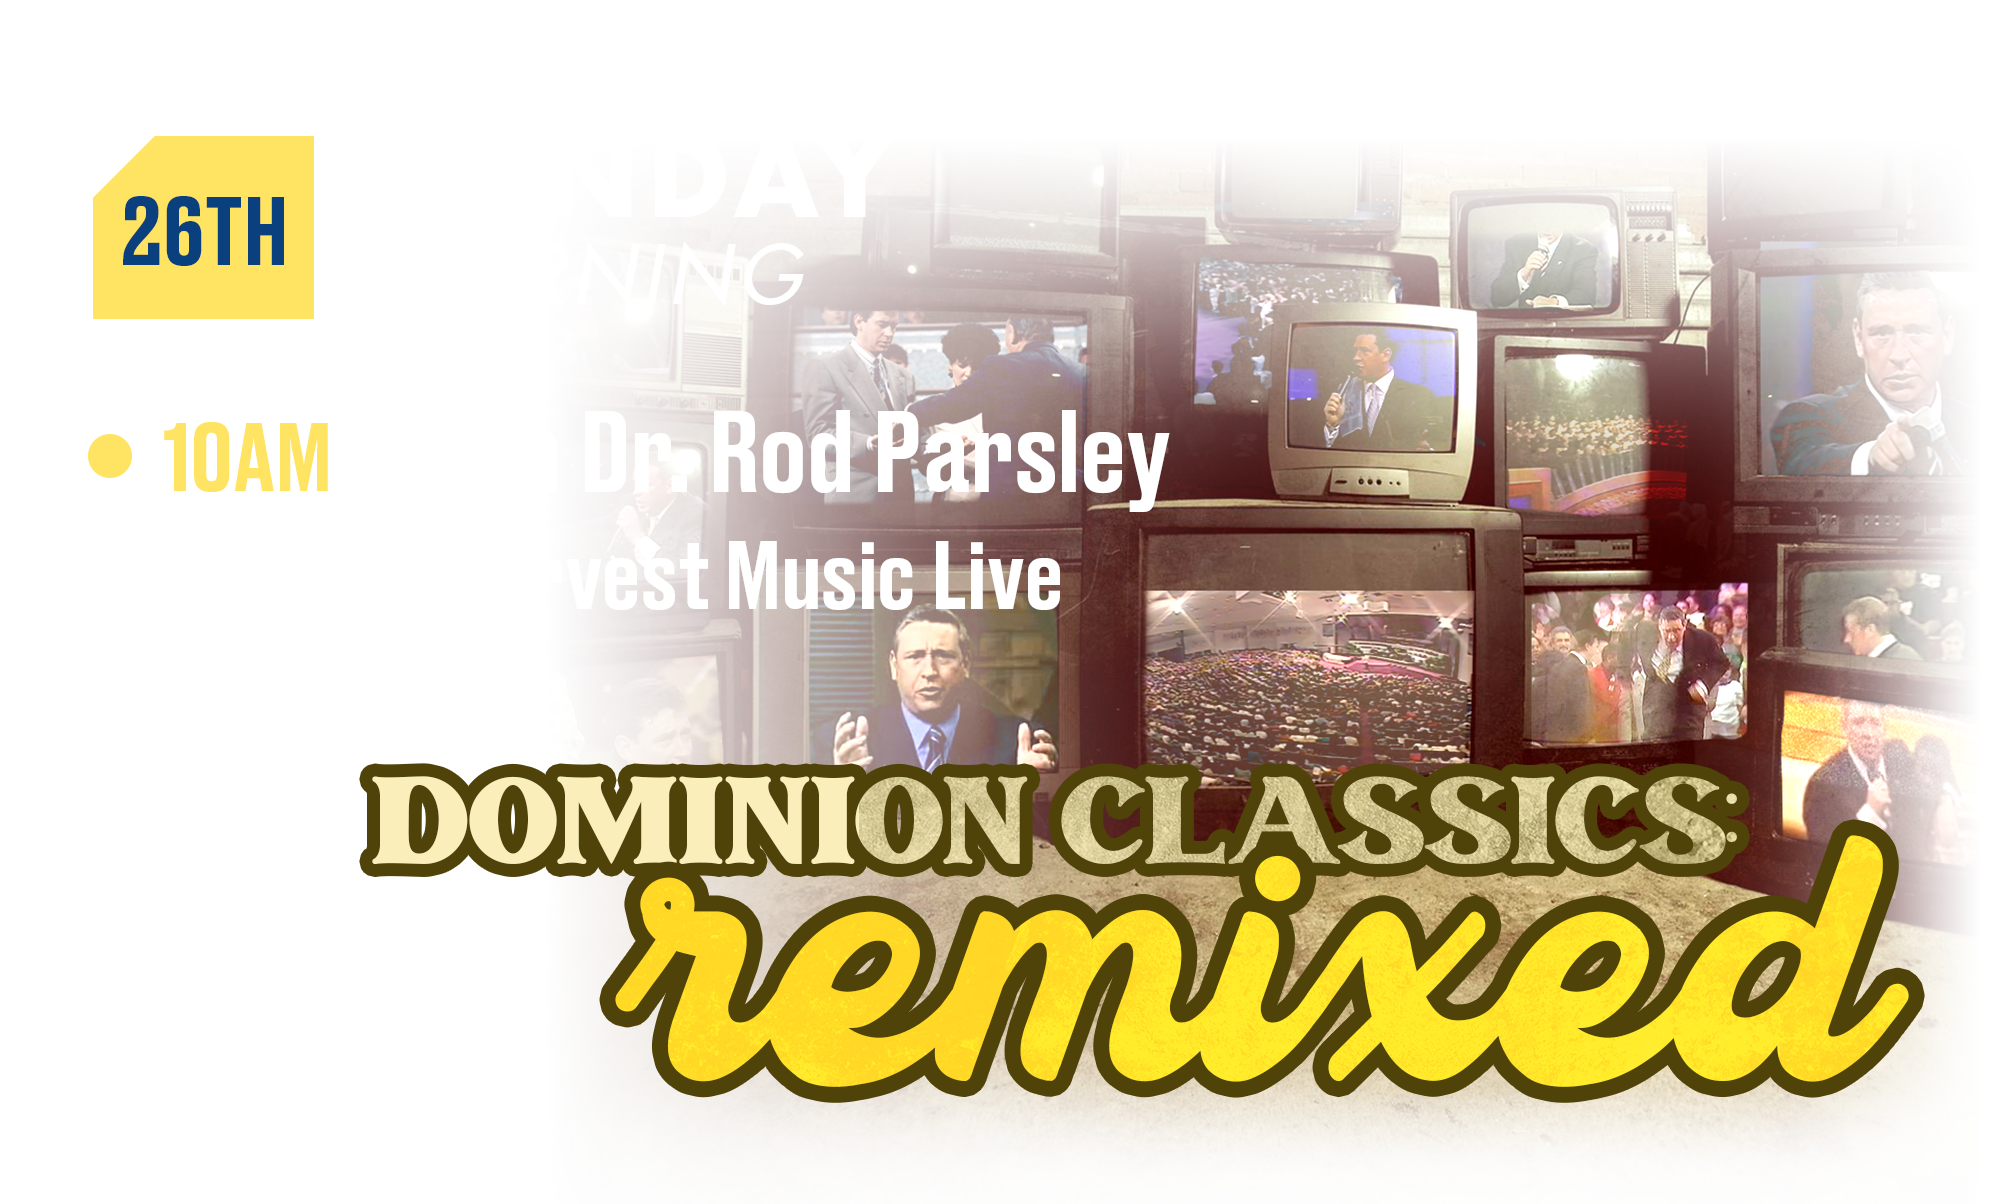 26th with Dr. Rod Parsley and Harvest Music Live